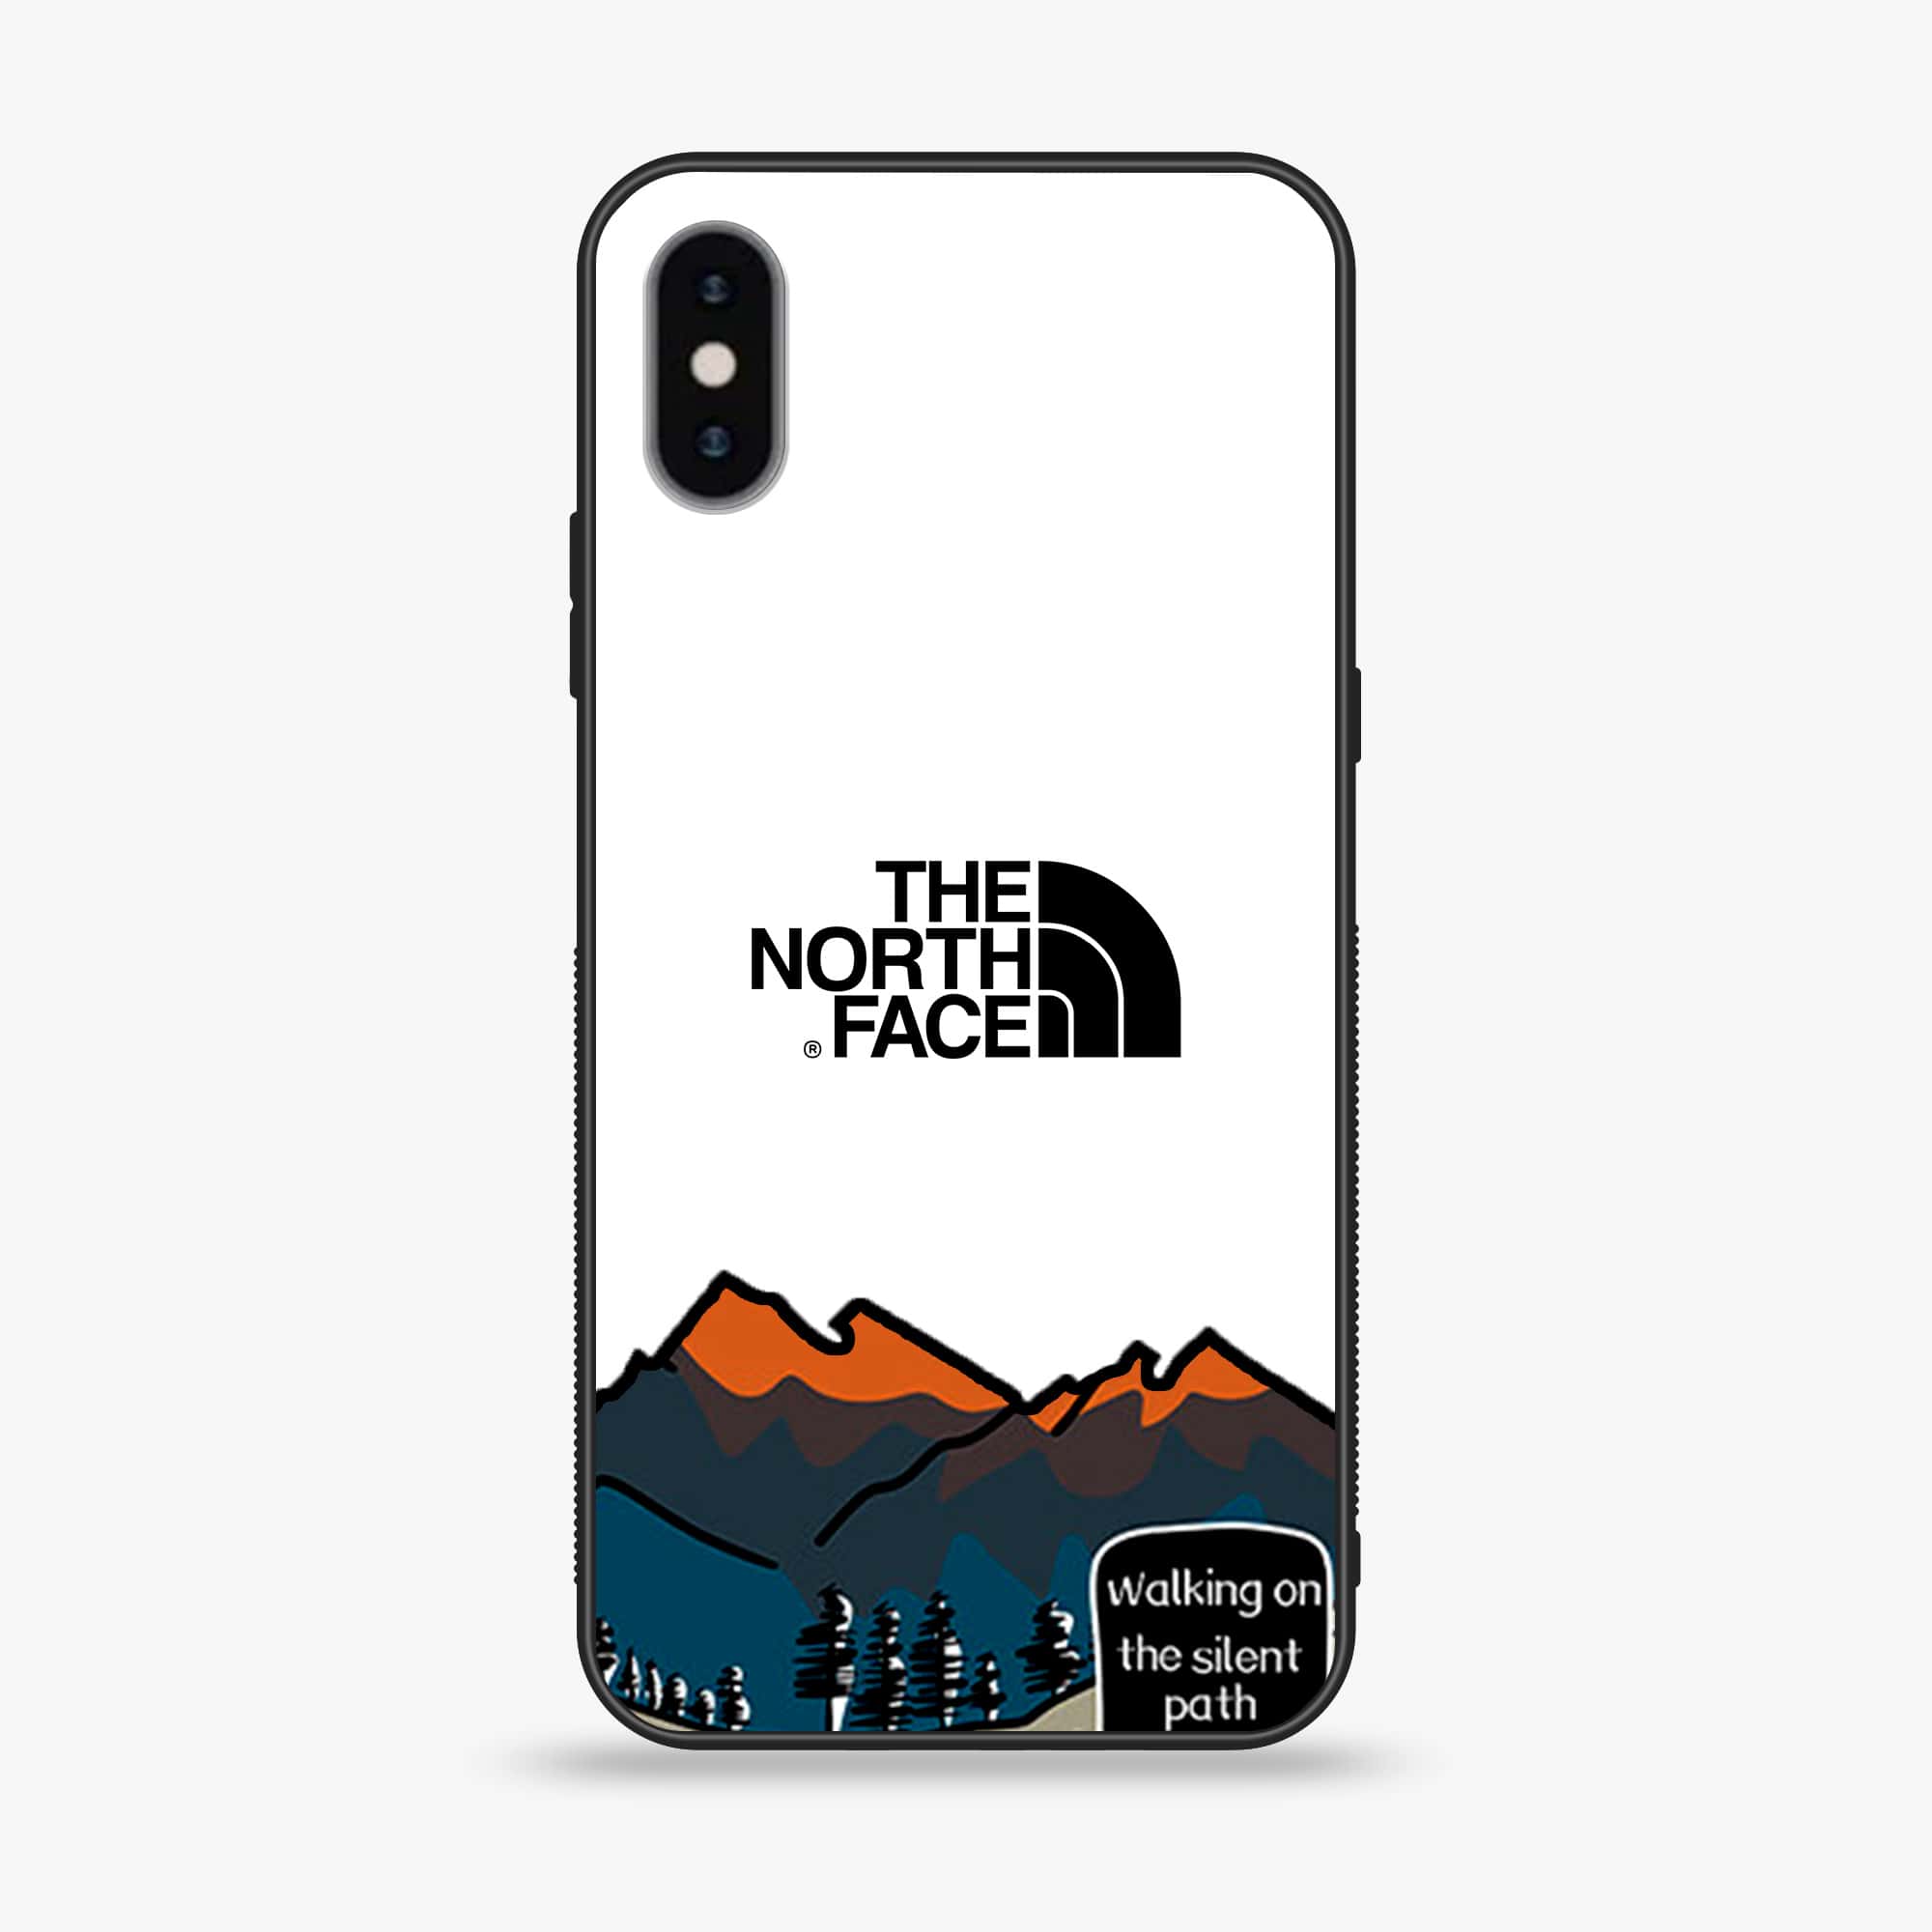 iPhone X/XS - The North Face Series - Premium Printed Glass soft Bumper shock Proof Case